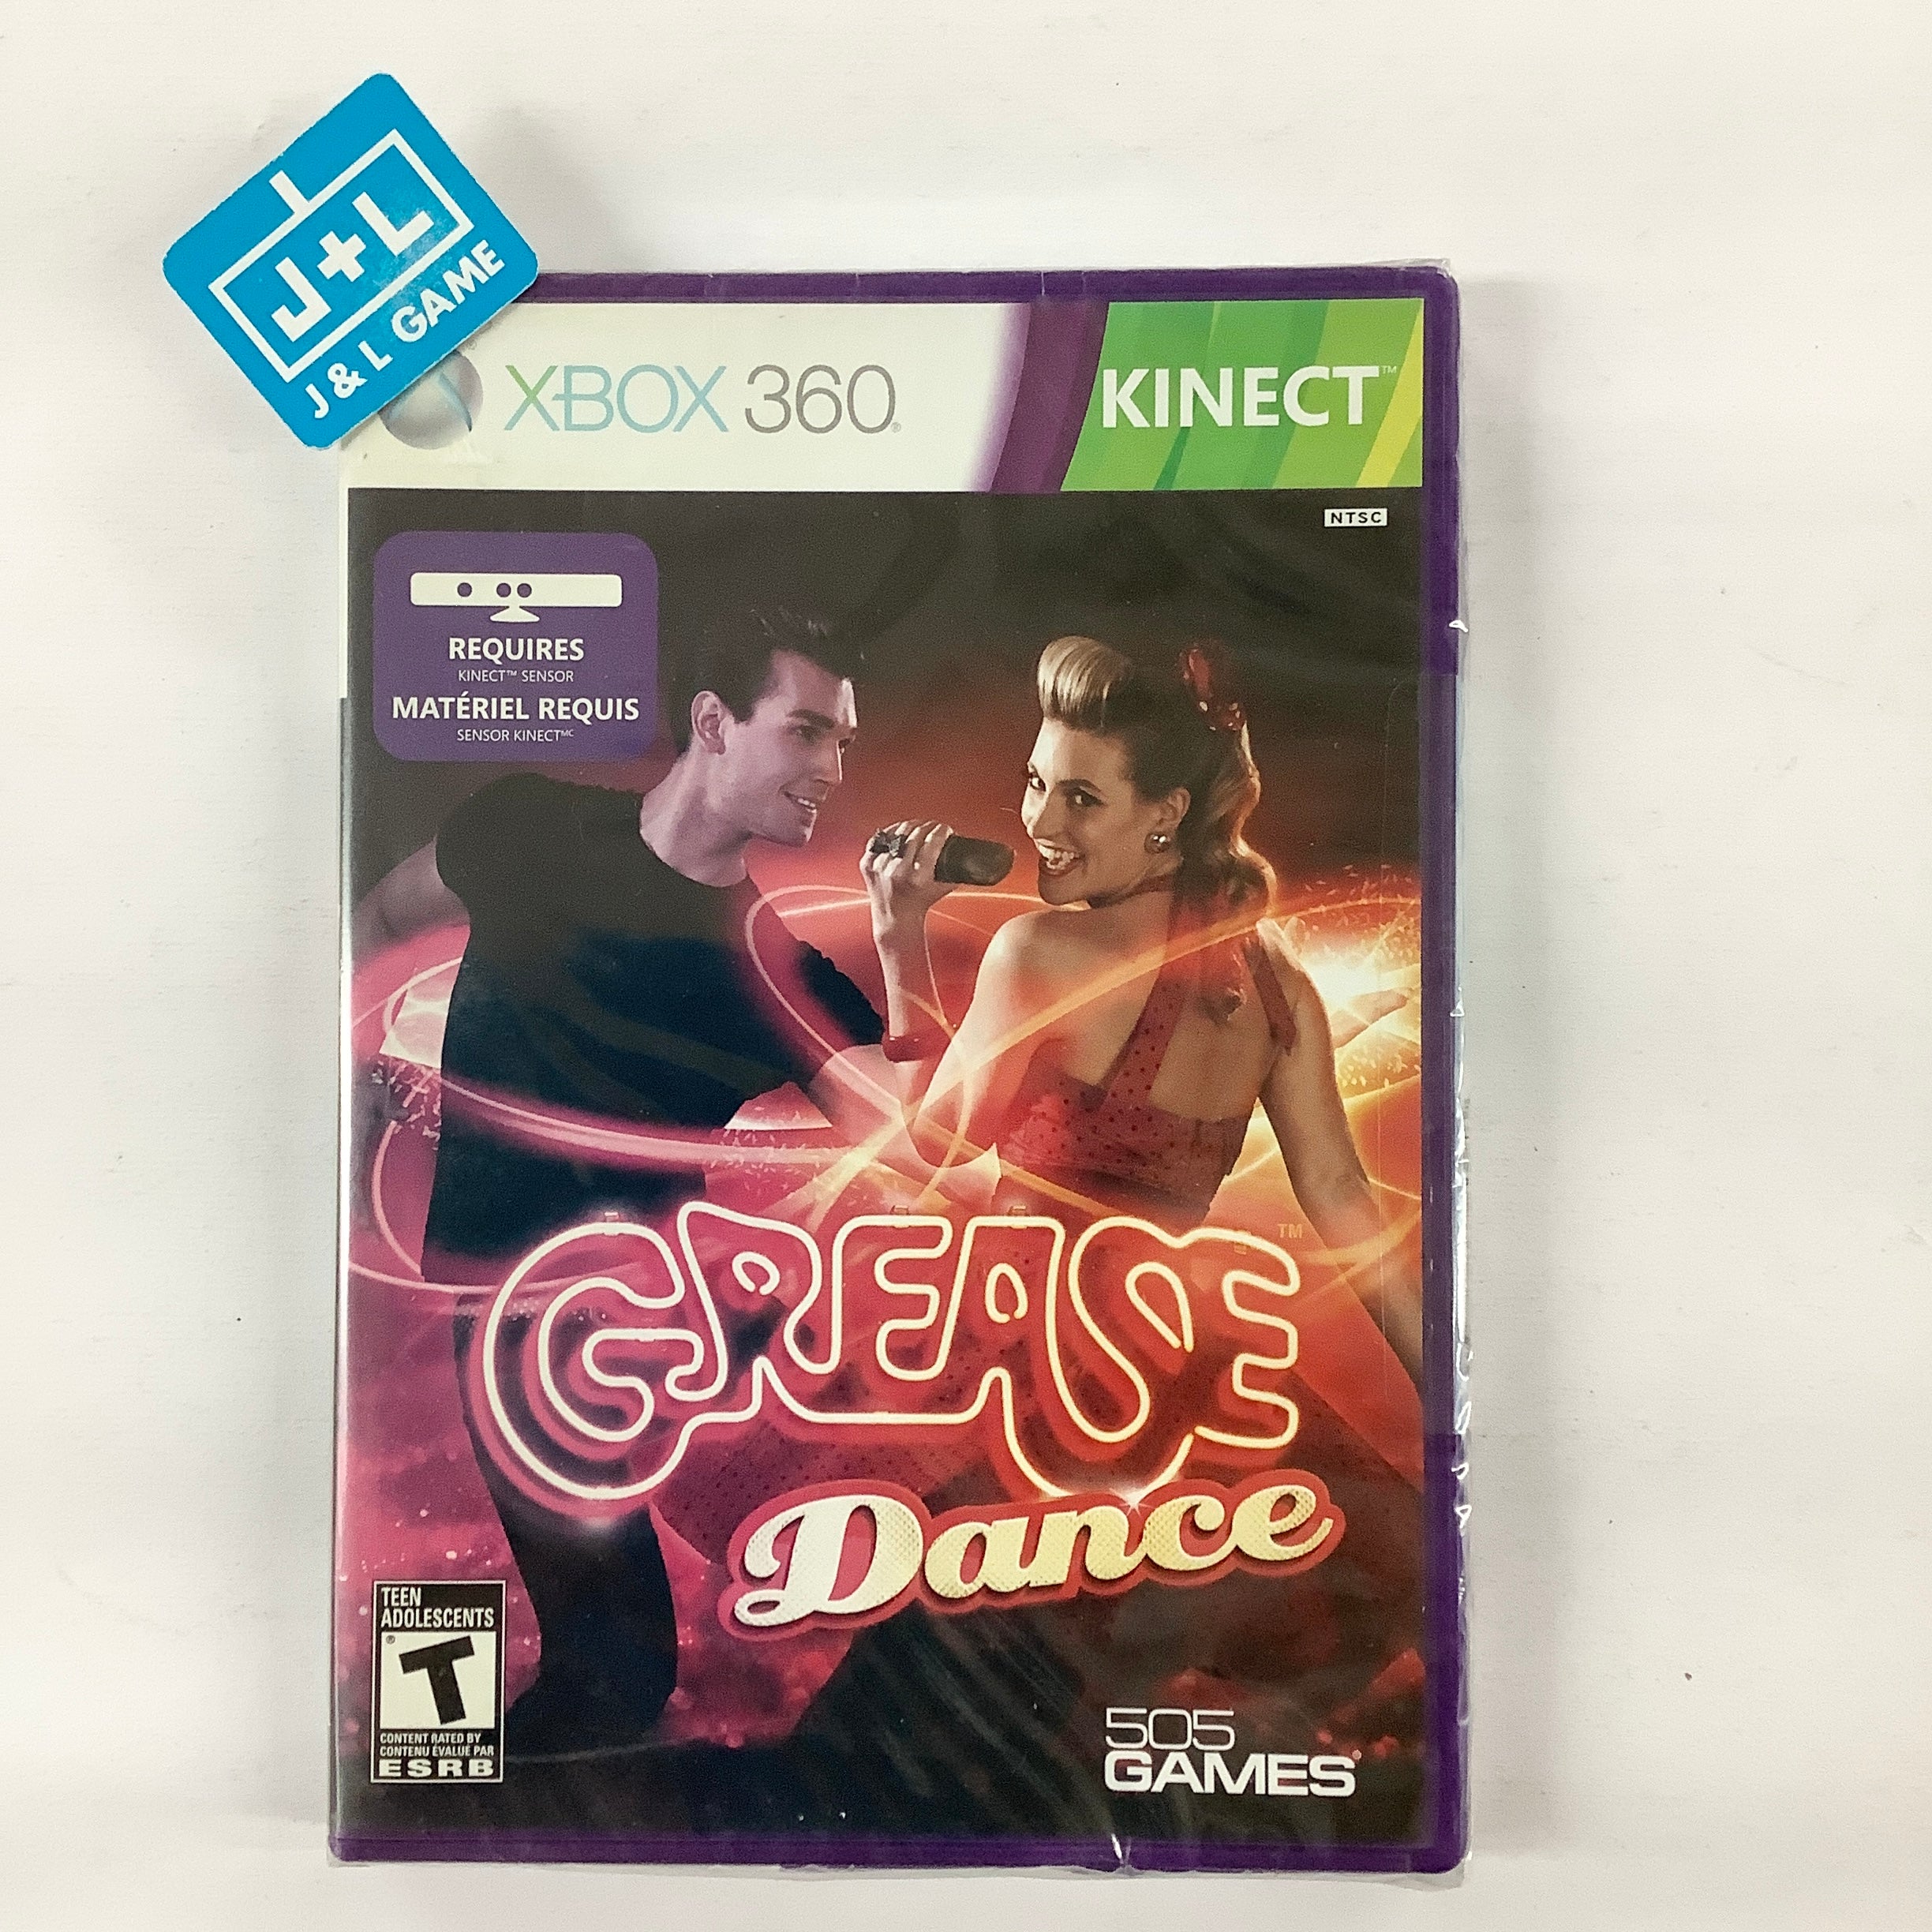 Grease Dance - Xbox 360 Video Games 505 Games   